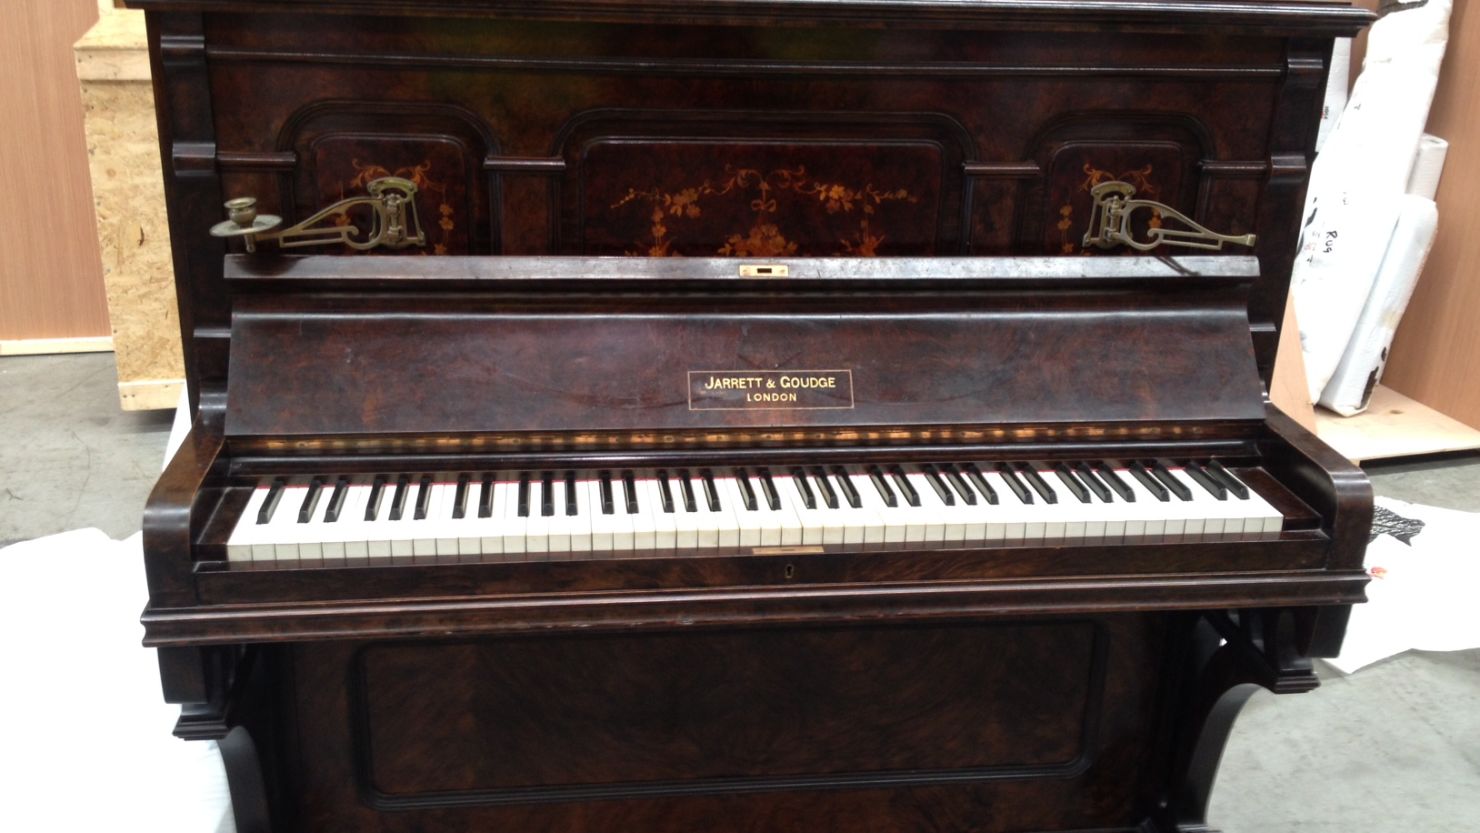 Julian Paton's antique piano was made in 1895. On July 26, the ivory keys were stripped by New Zealand's Department of Conservation in accordance with CITES ivory regulations.